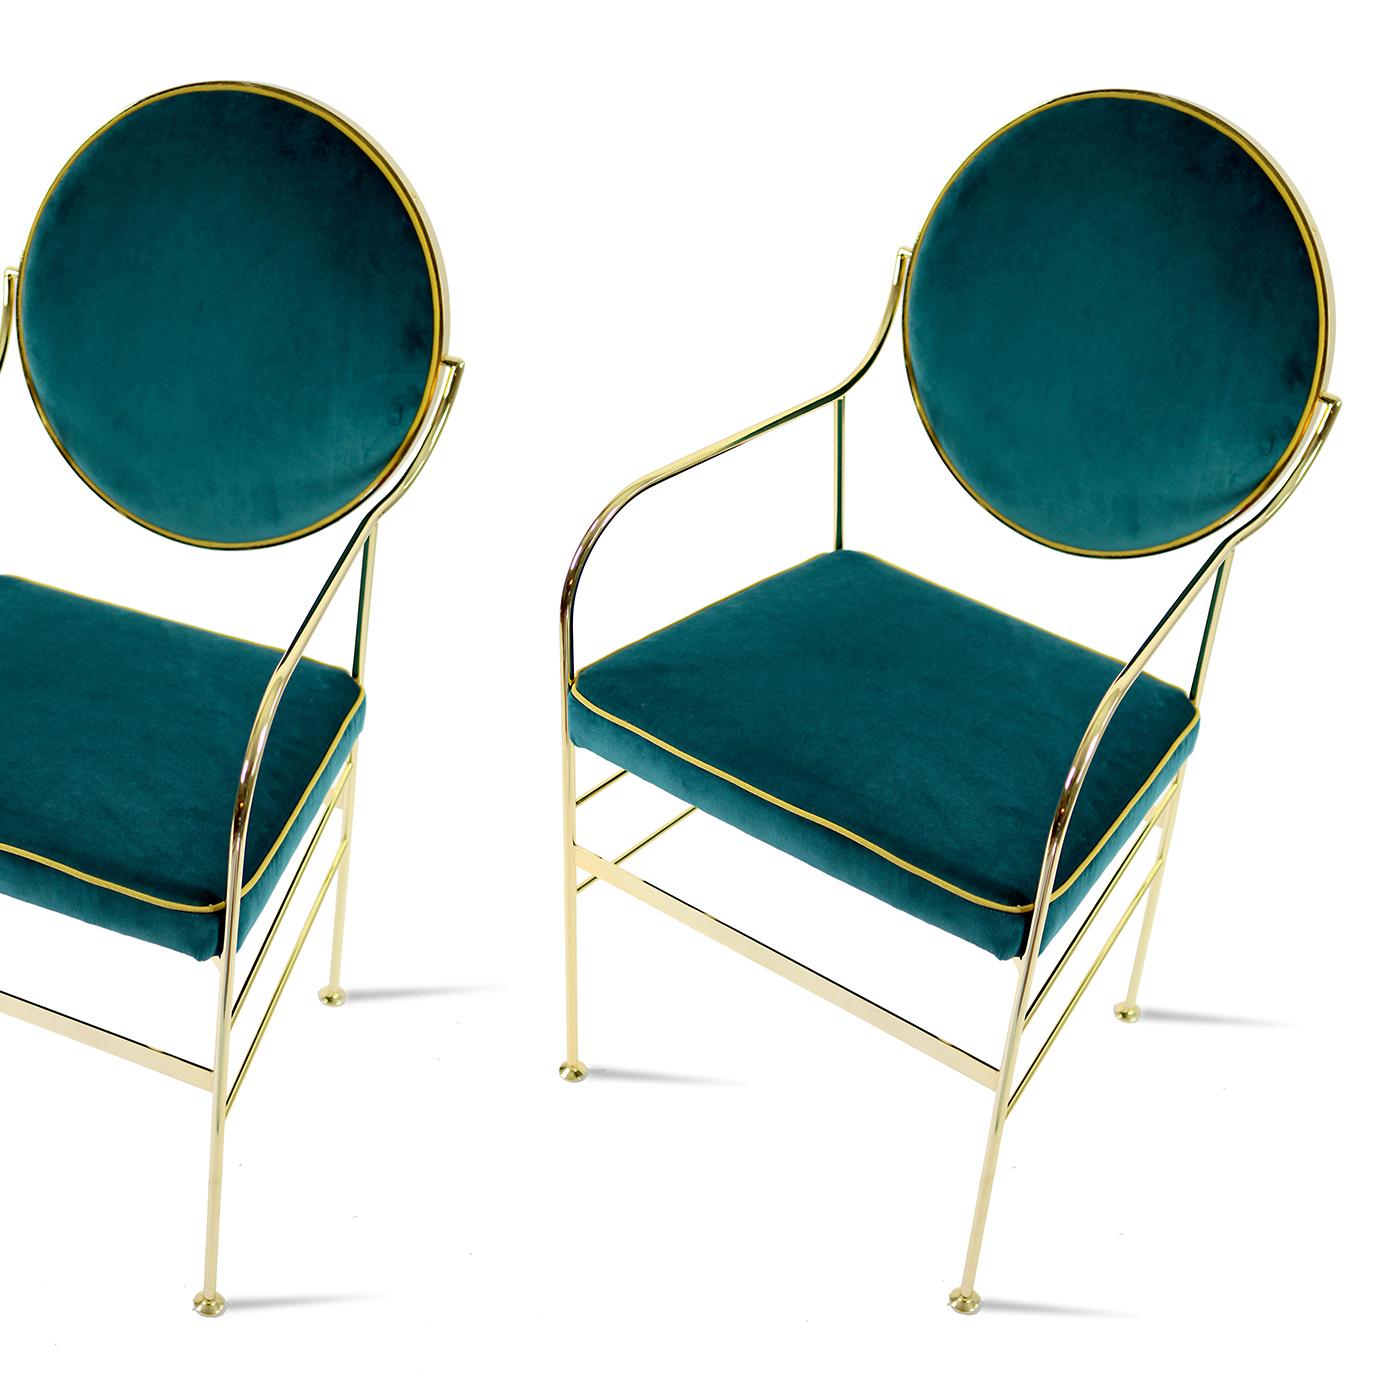 Combining vivid colors, a precious finish, and hand-craftsmanship, this chair will make an elegant statement in a modern interior. Its silhouette updates the Louis chair, reinterpreted here with an iron structure that boasts a 24-karat gold plating